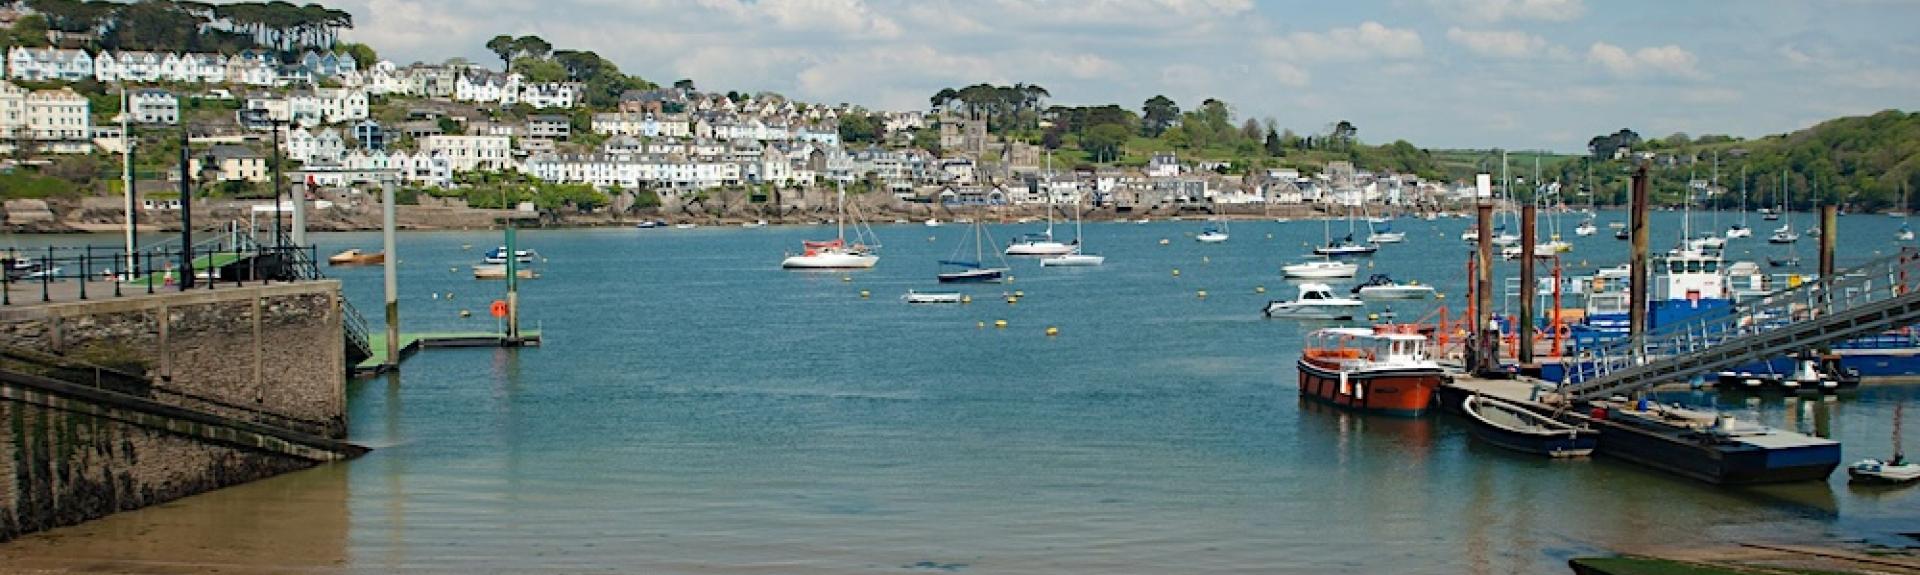 A distant view of the estuary and waterside houses  in Fowey.